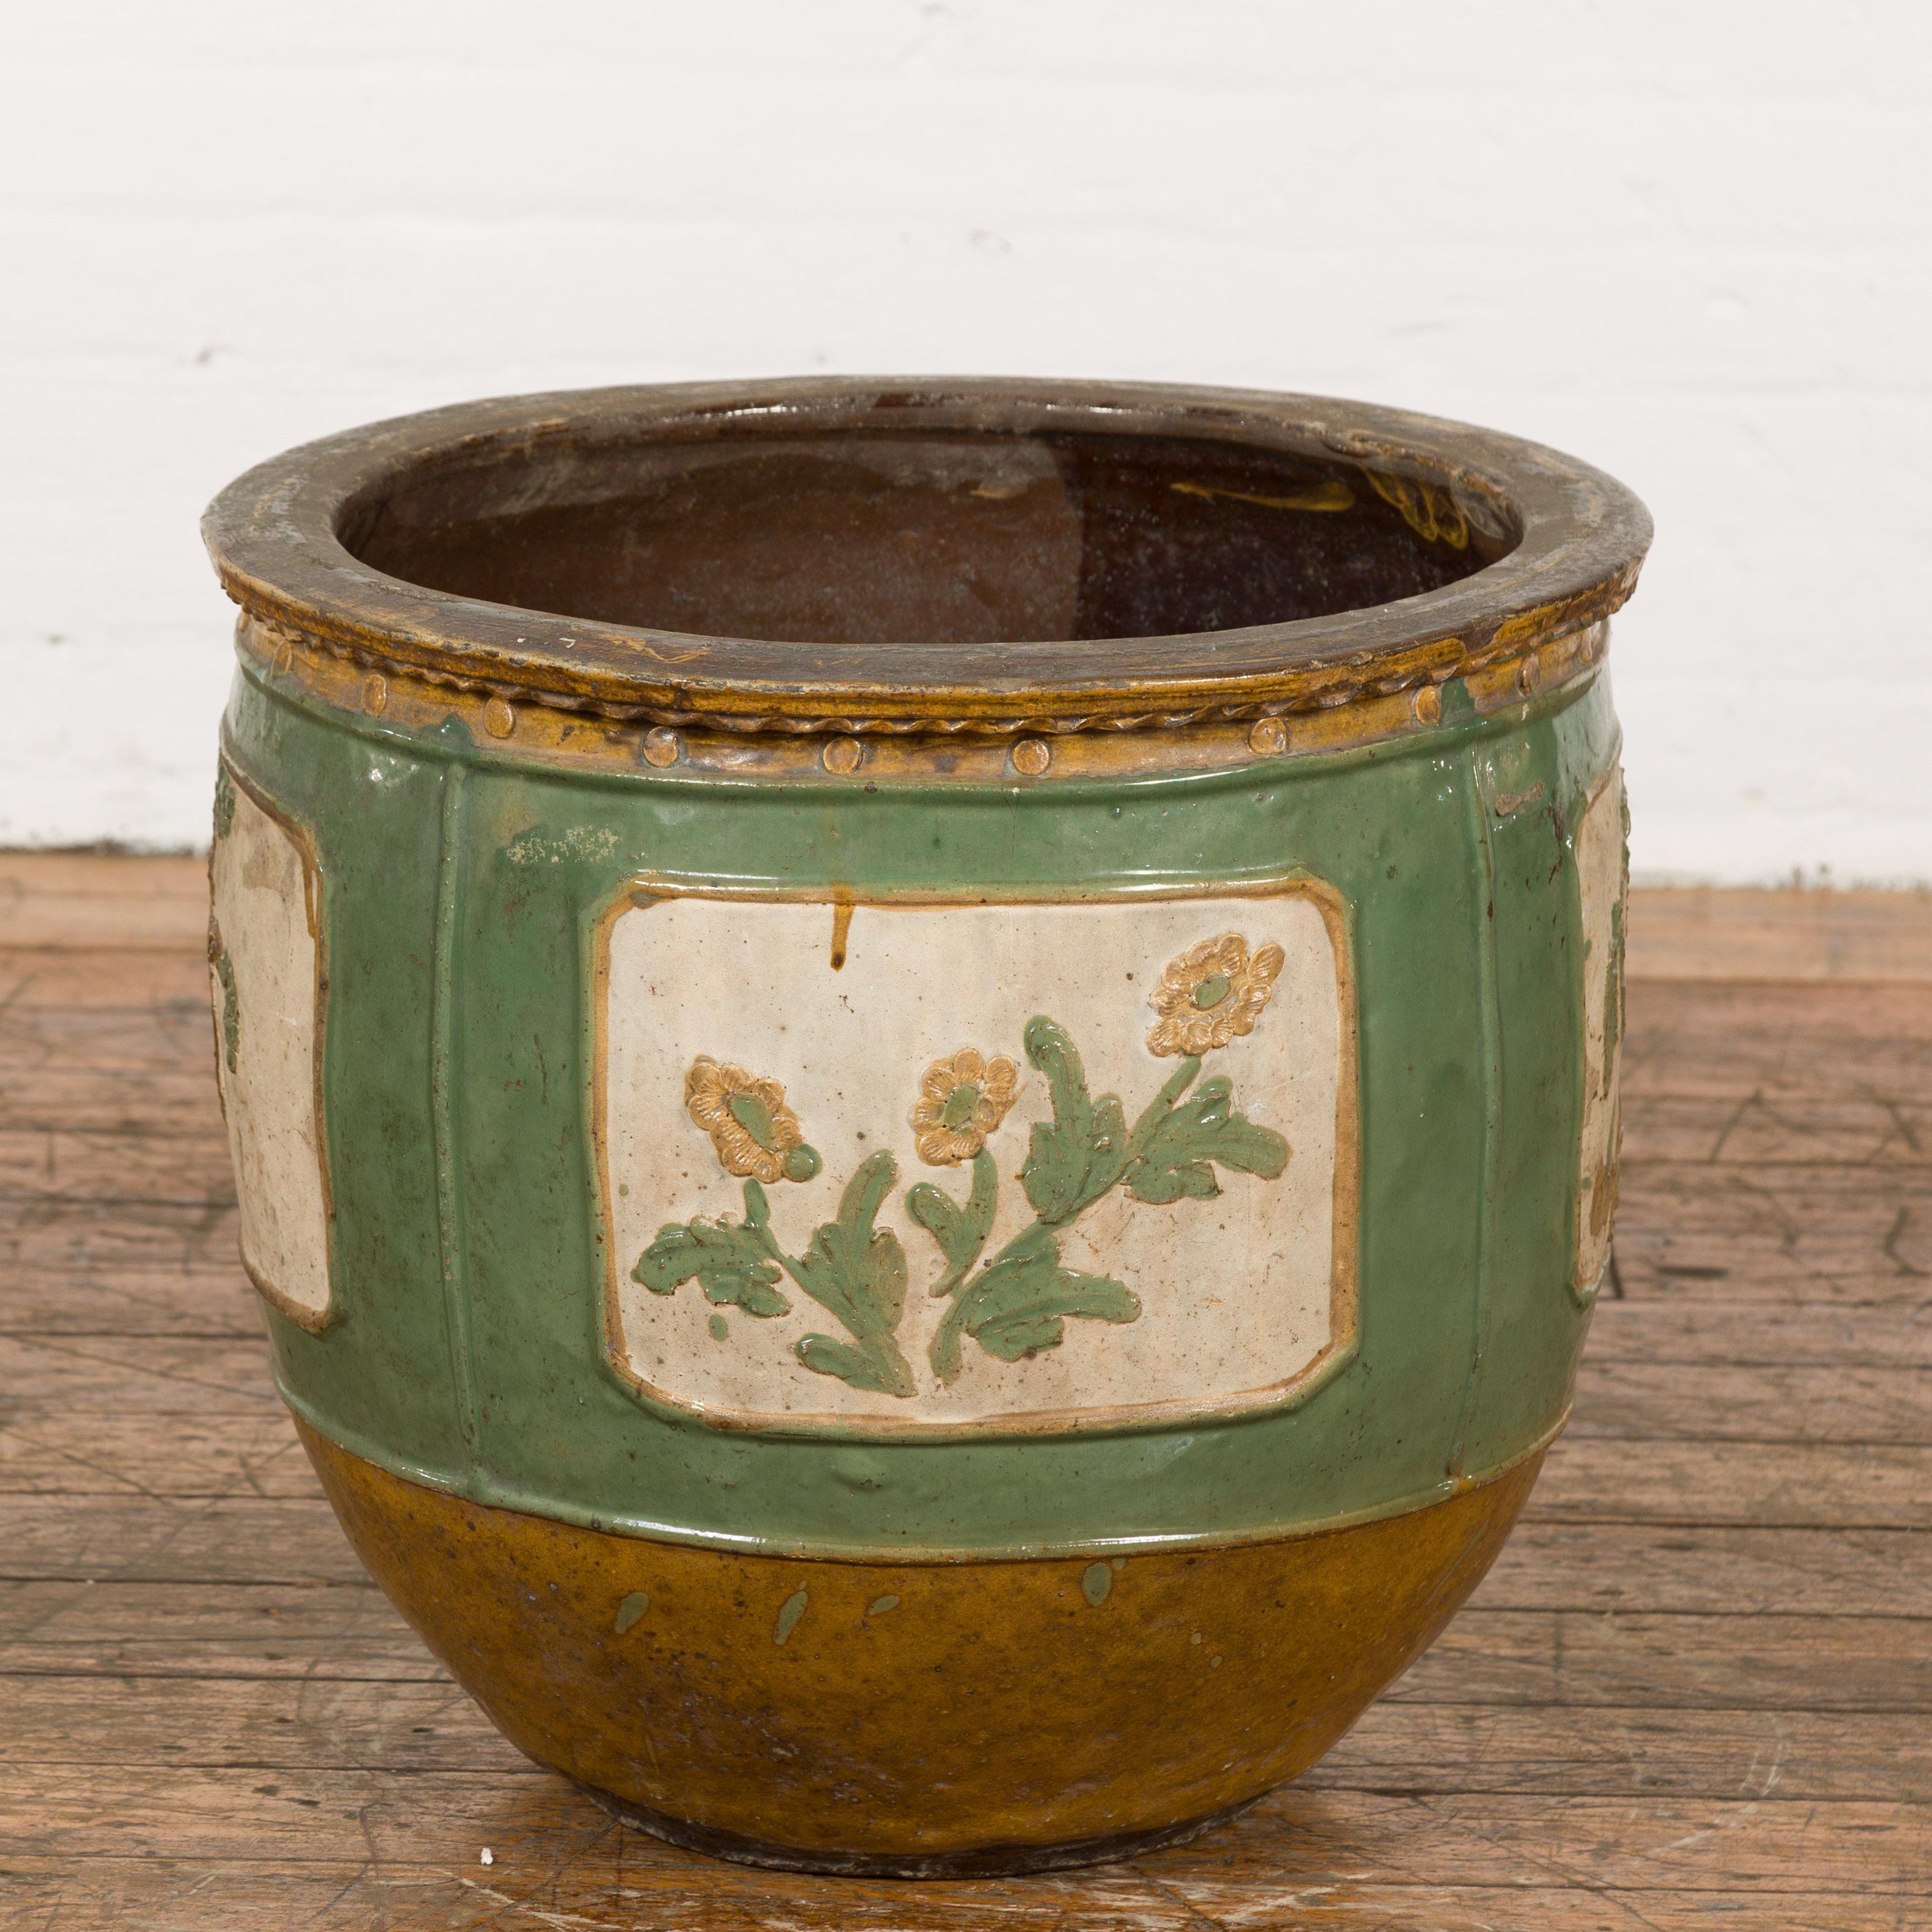 A Chinese planter from the 19th century, with green glazed body, cartouches with flowers and trees and yellow glazed bottom. Created in China during the 19th century, this large planter features a circular opening measuring 15 inches of diameter,